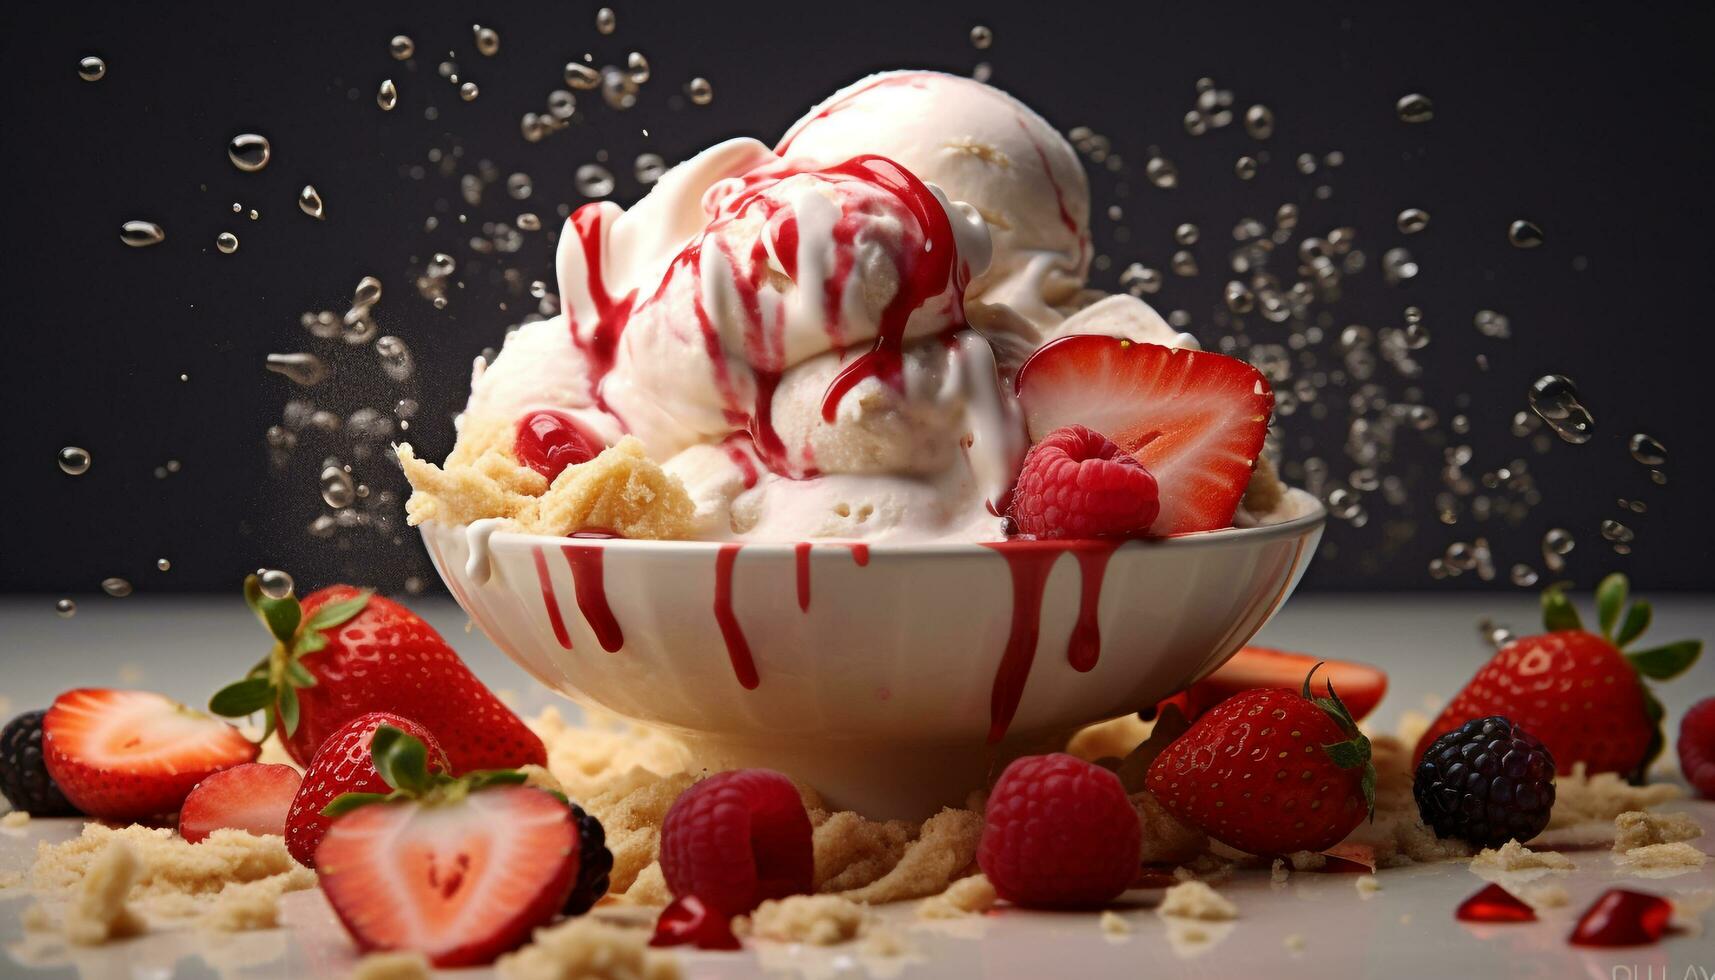 Freshness and sweetness in a bowl of homemade strawberry ice cream generated by AI photo